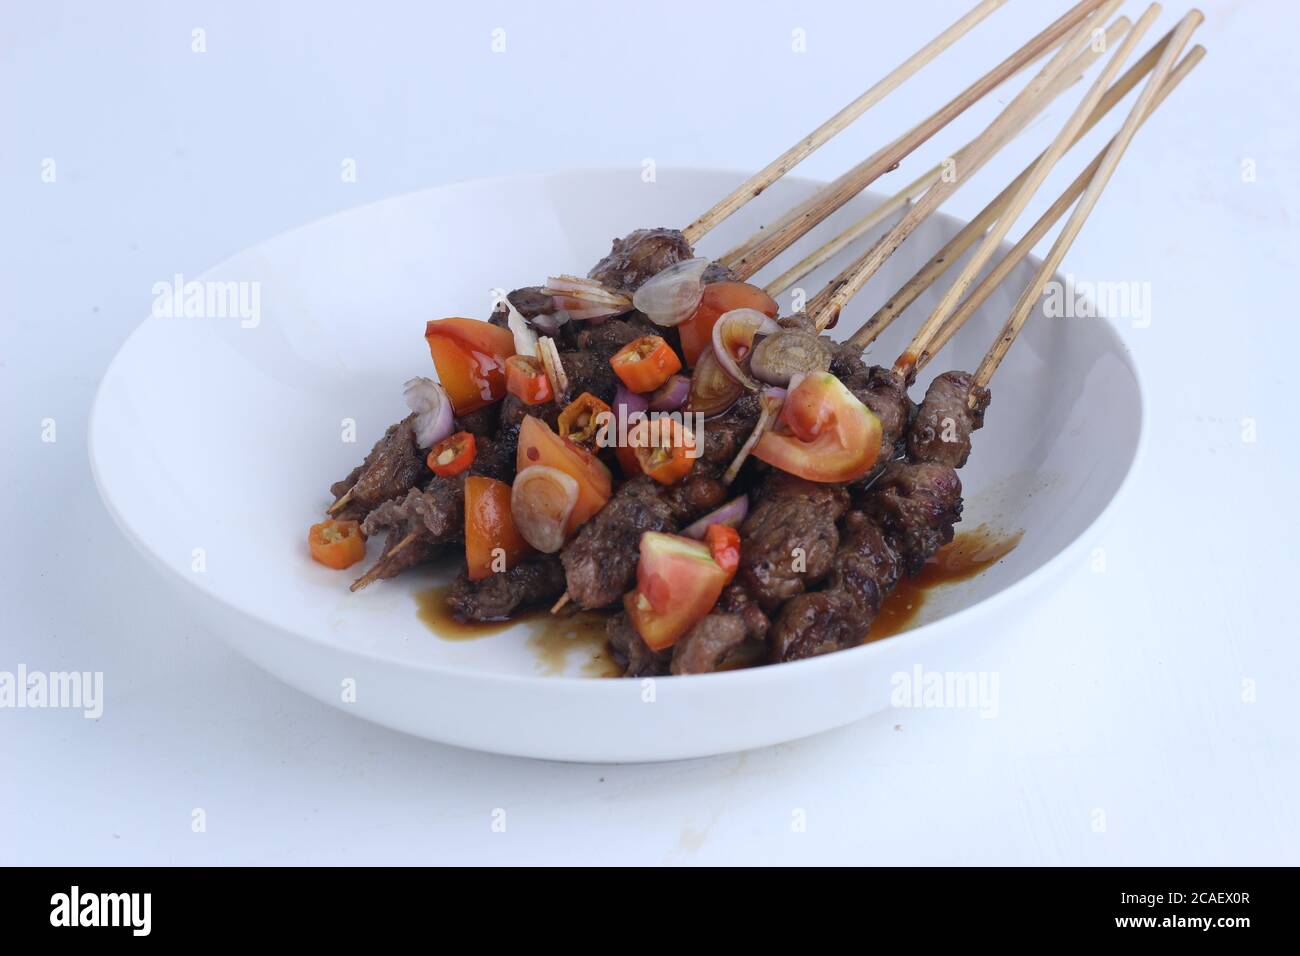 Sate Kambing Is Lamb Satay And Traditional Food From Indonesia Isolated On White Background Stock Photo Alamy